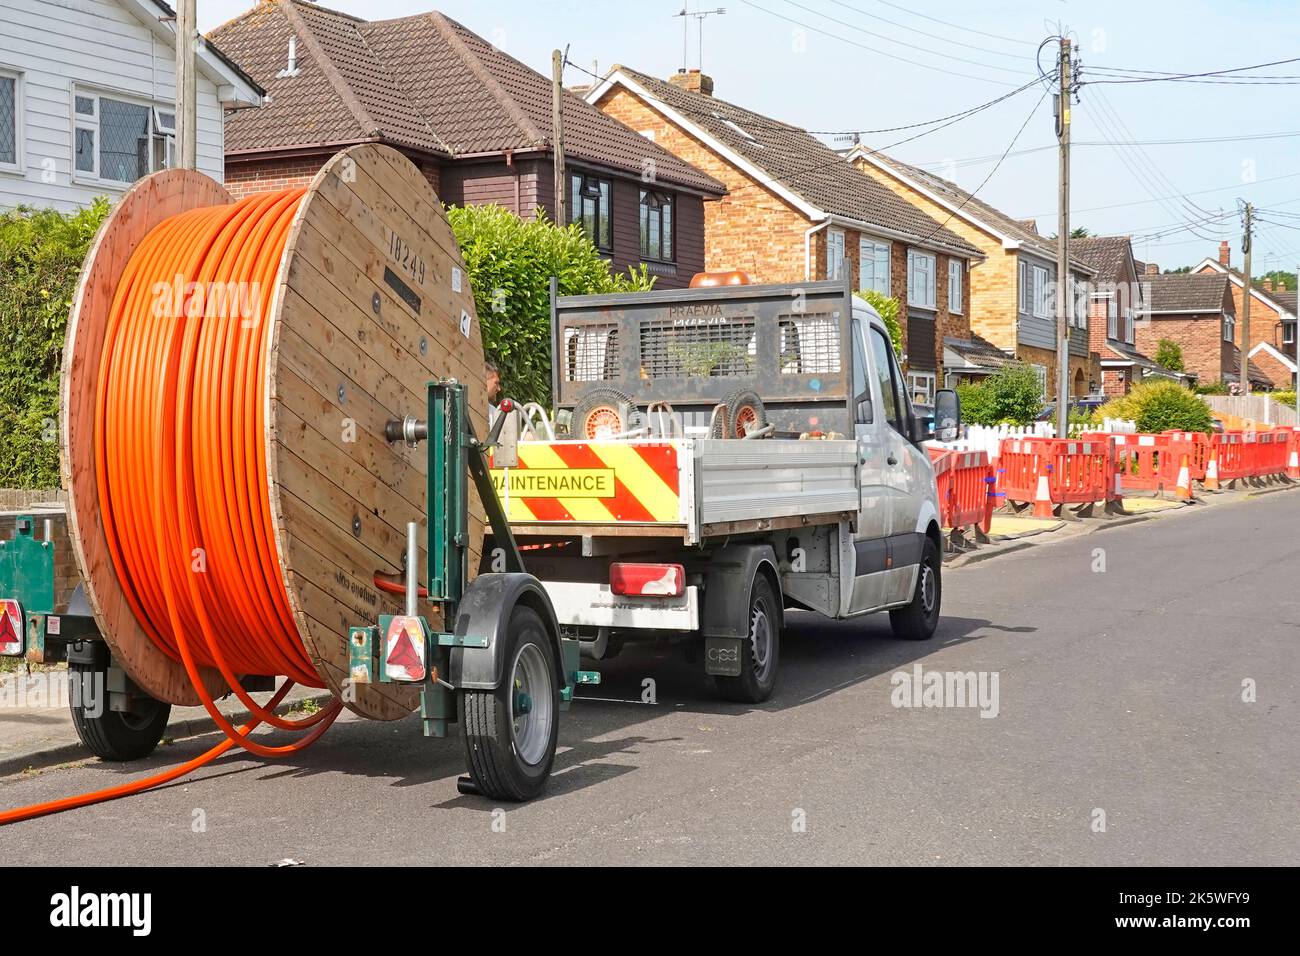 Cable drum trailer contractors pick up truck beside pavement trench working on Fibre Optic Broadband road works in village residential street Essex UK Stock Photo